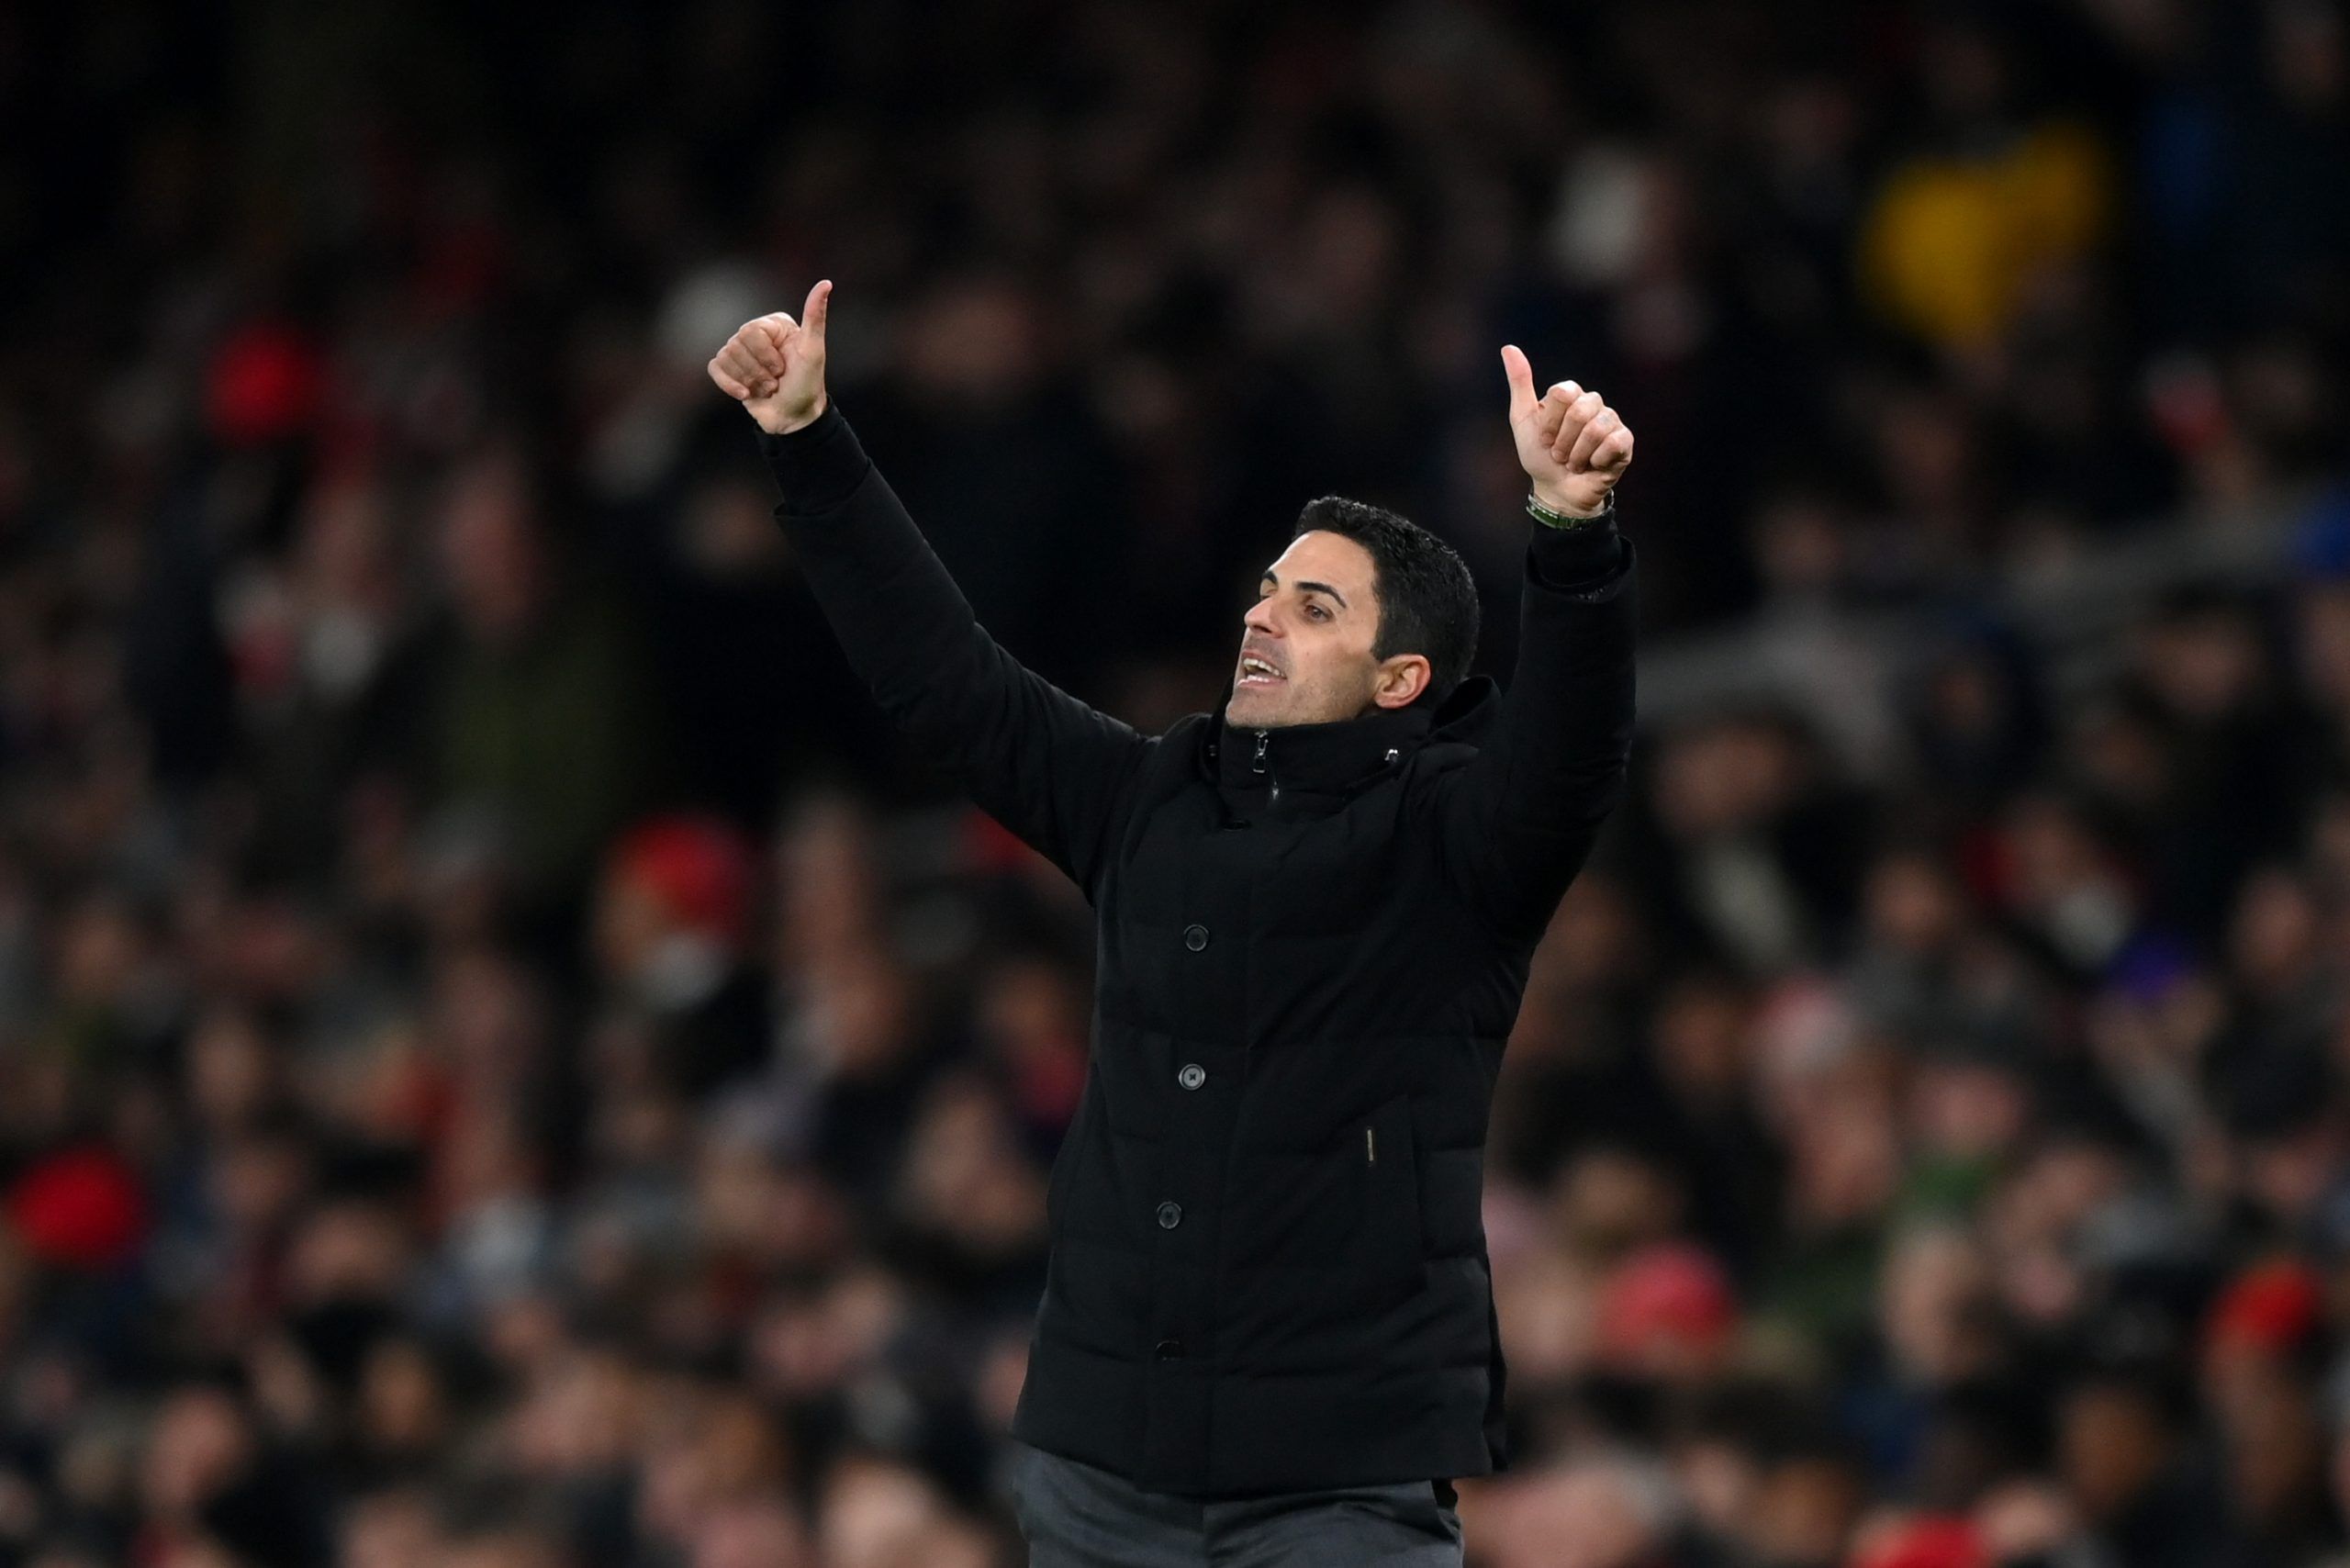 Arsenal manager Mikel Arteta giving thumbs up